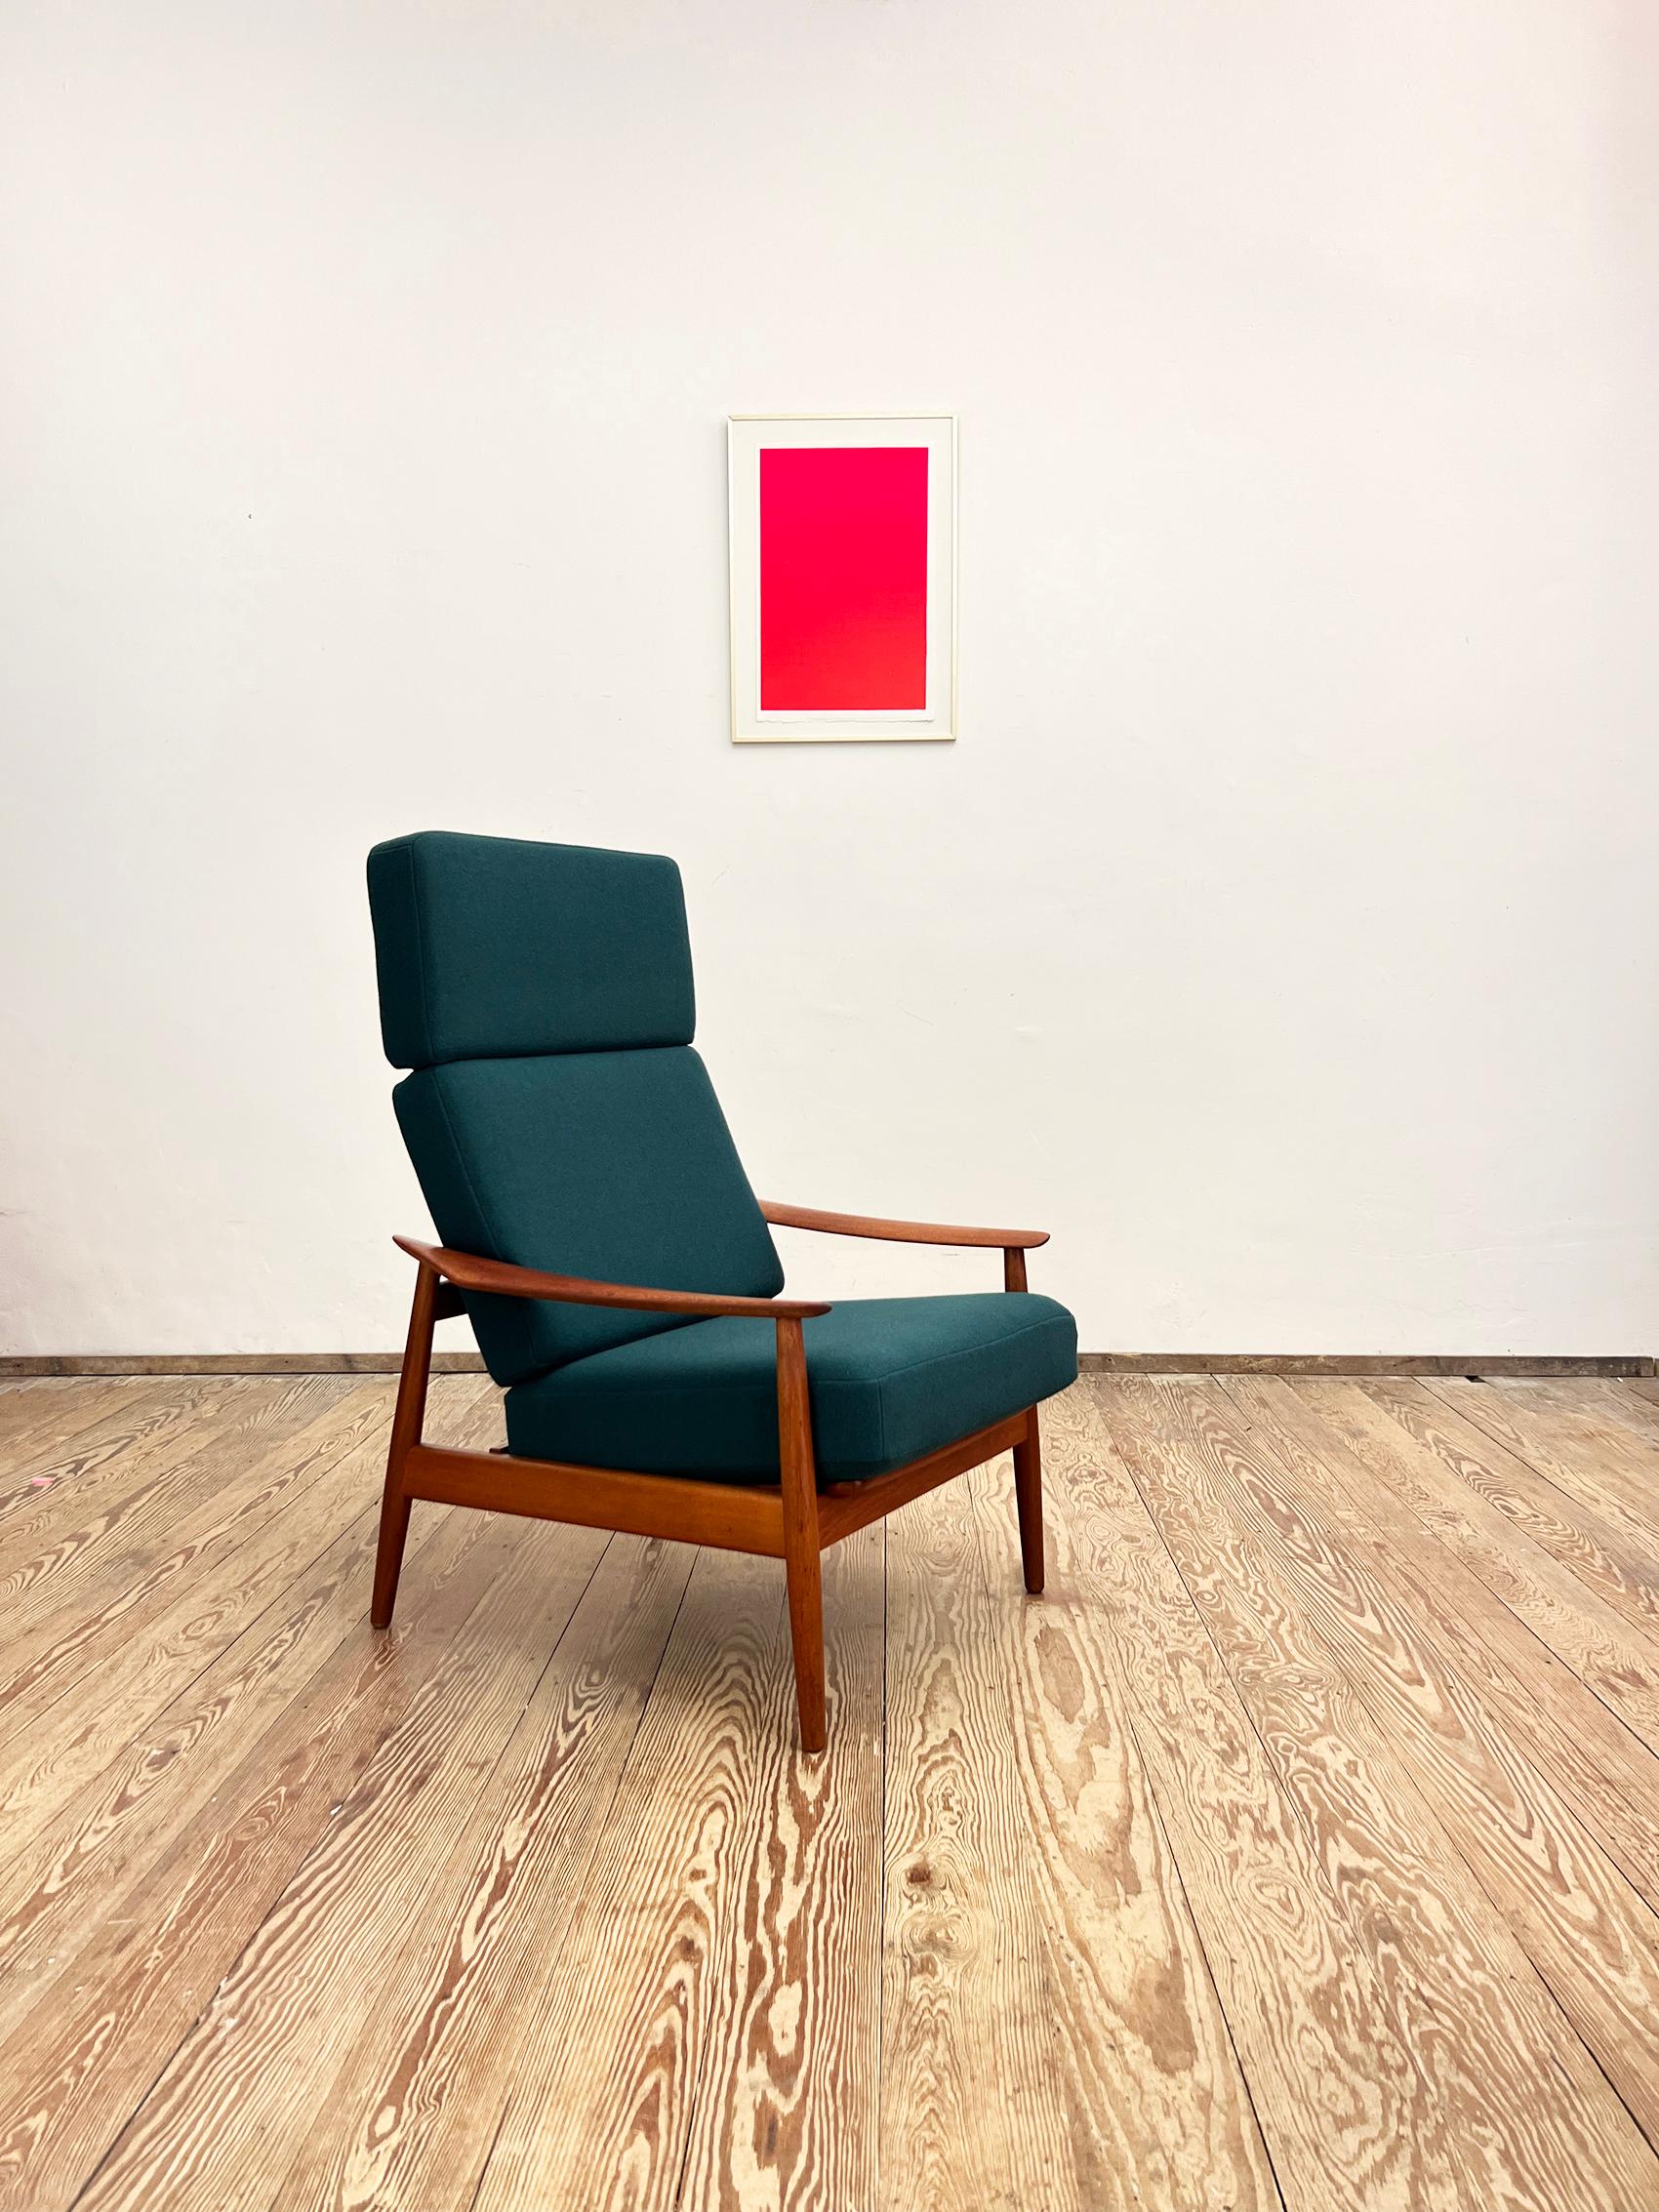 Dimensions: 80 x 100 x 75 cm (Width x Height x Depth)

This beautiful lounge chair model FD164 was designed by Arne Vodder for France and Son in the 1950s in Denmark. The elegant shape and the fragile proportions make this easy chair very pleasing